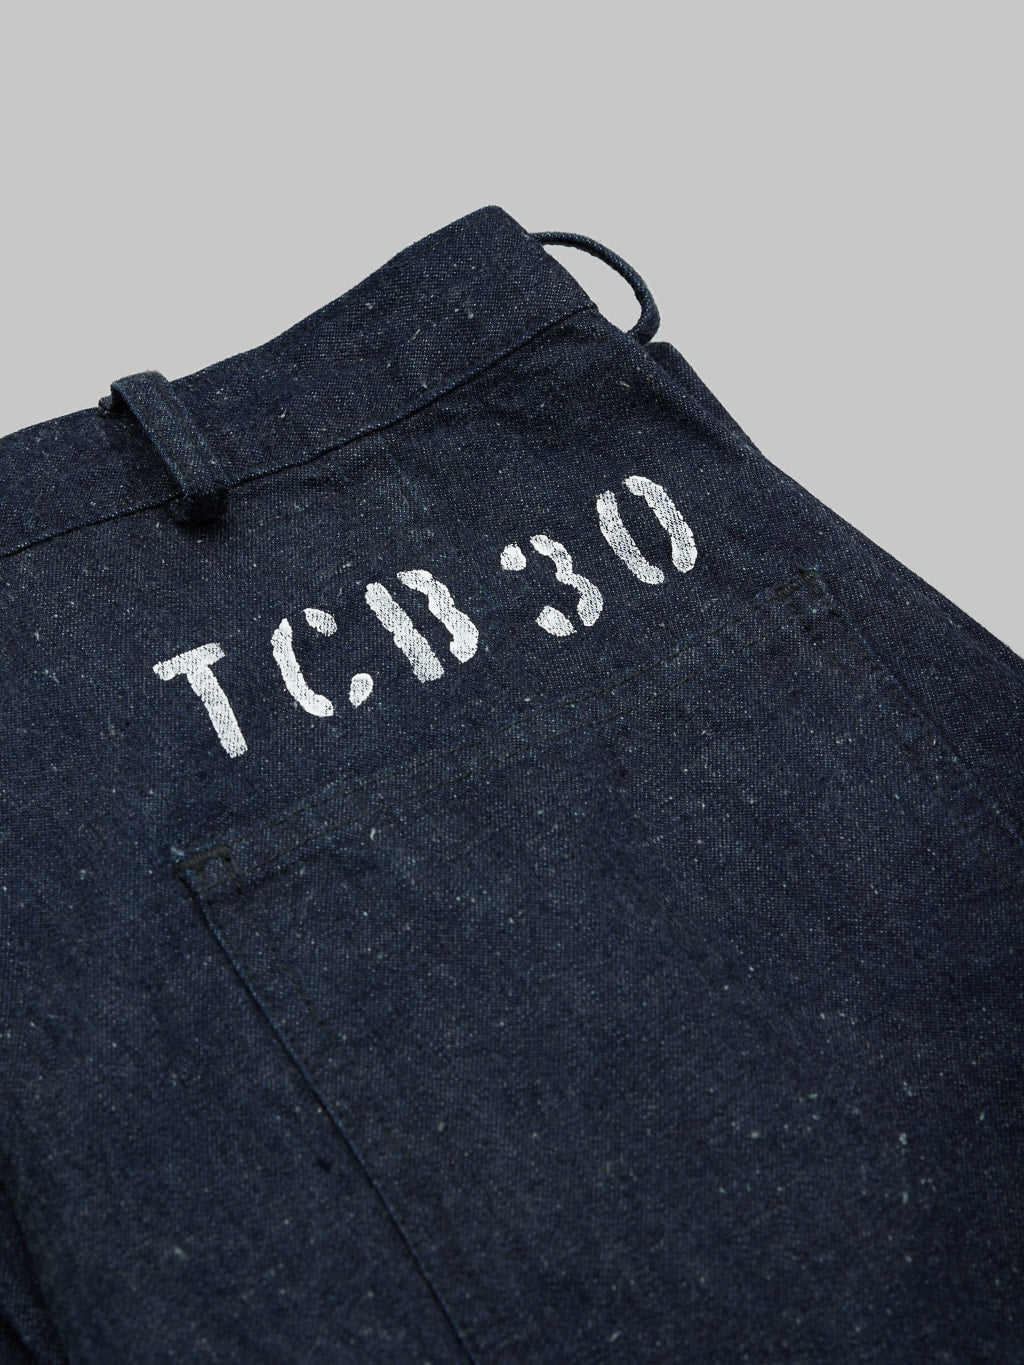 tcb jeans usn seamens denim trousers hand stencilled size on hip